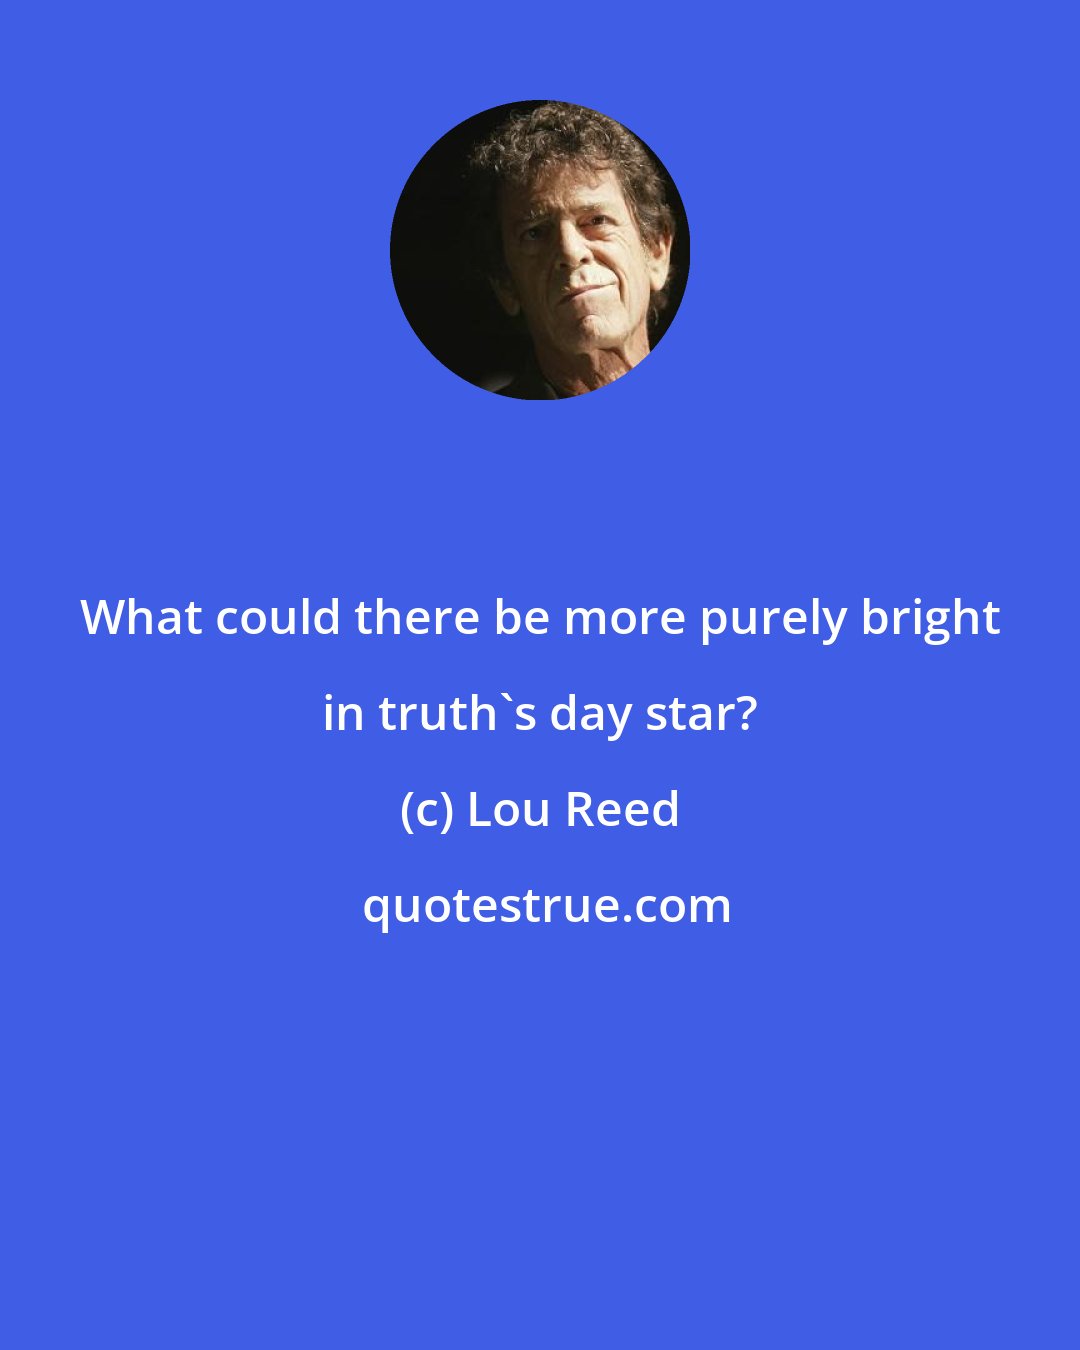 Lou Reed: What could there be more purely bright in truth's day star?